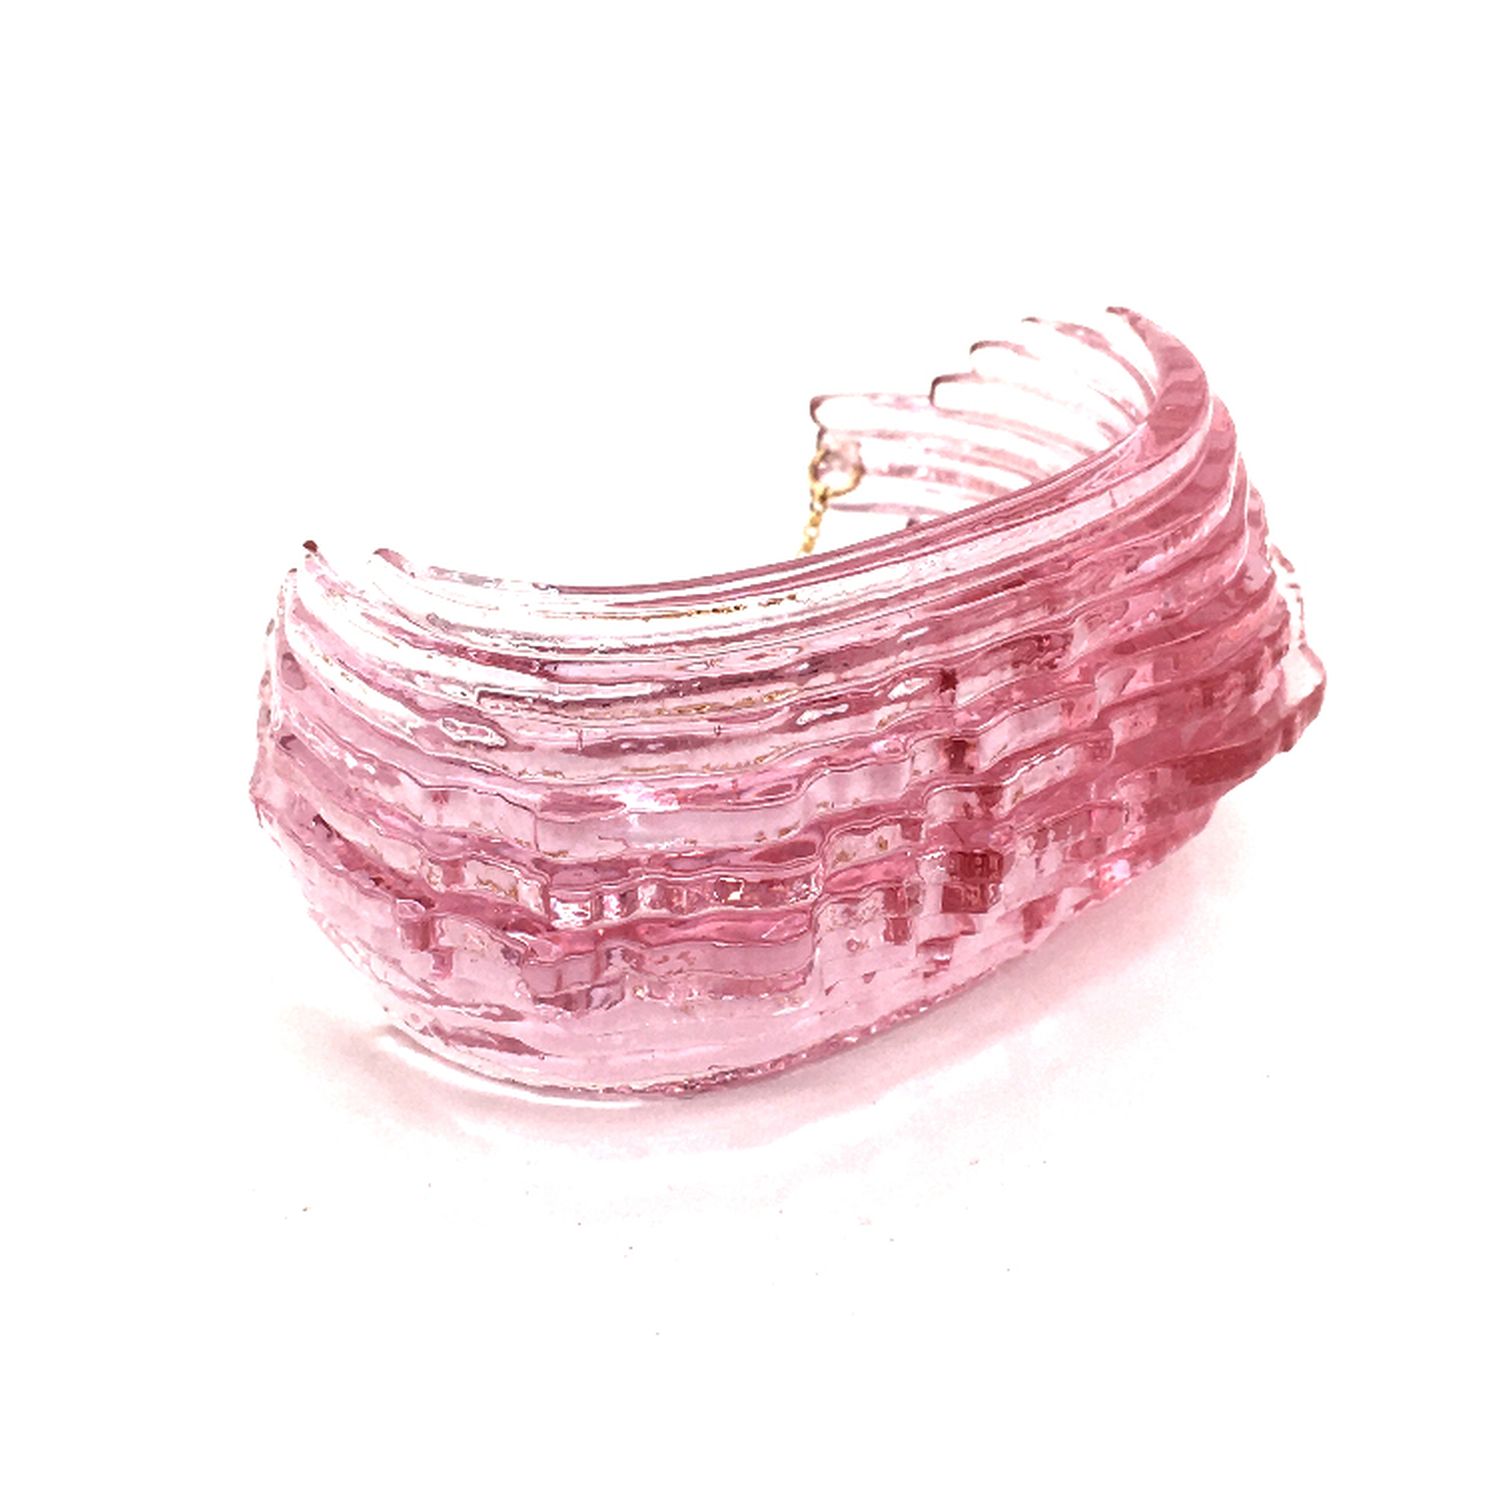 Broken Plates: Fuchsia Curly Moss Blend Cuff Product Image 1 of 4